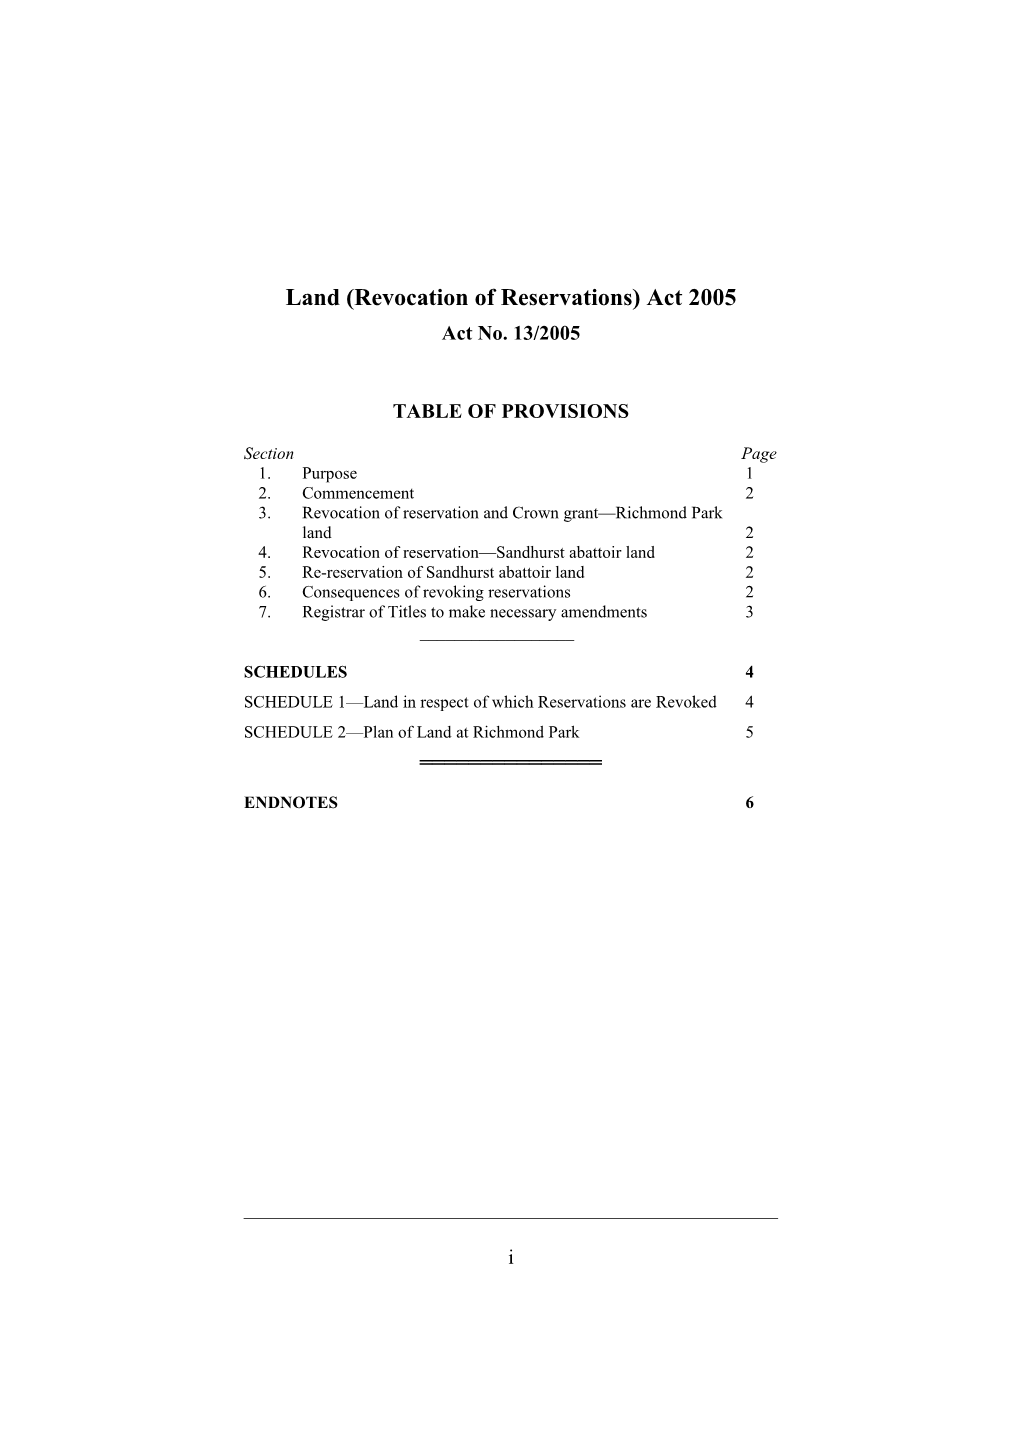 Land (Revocation of Reservations) Act 2005